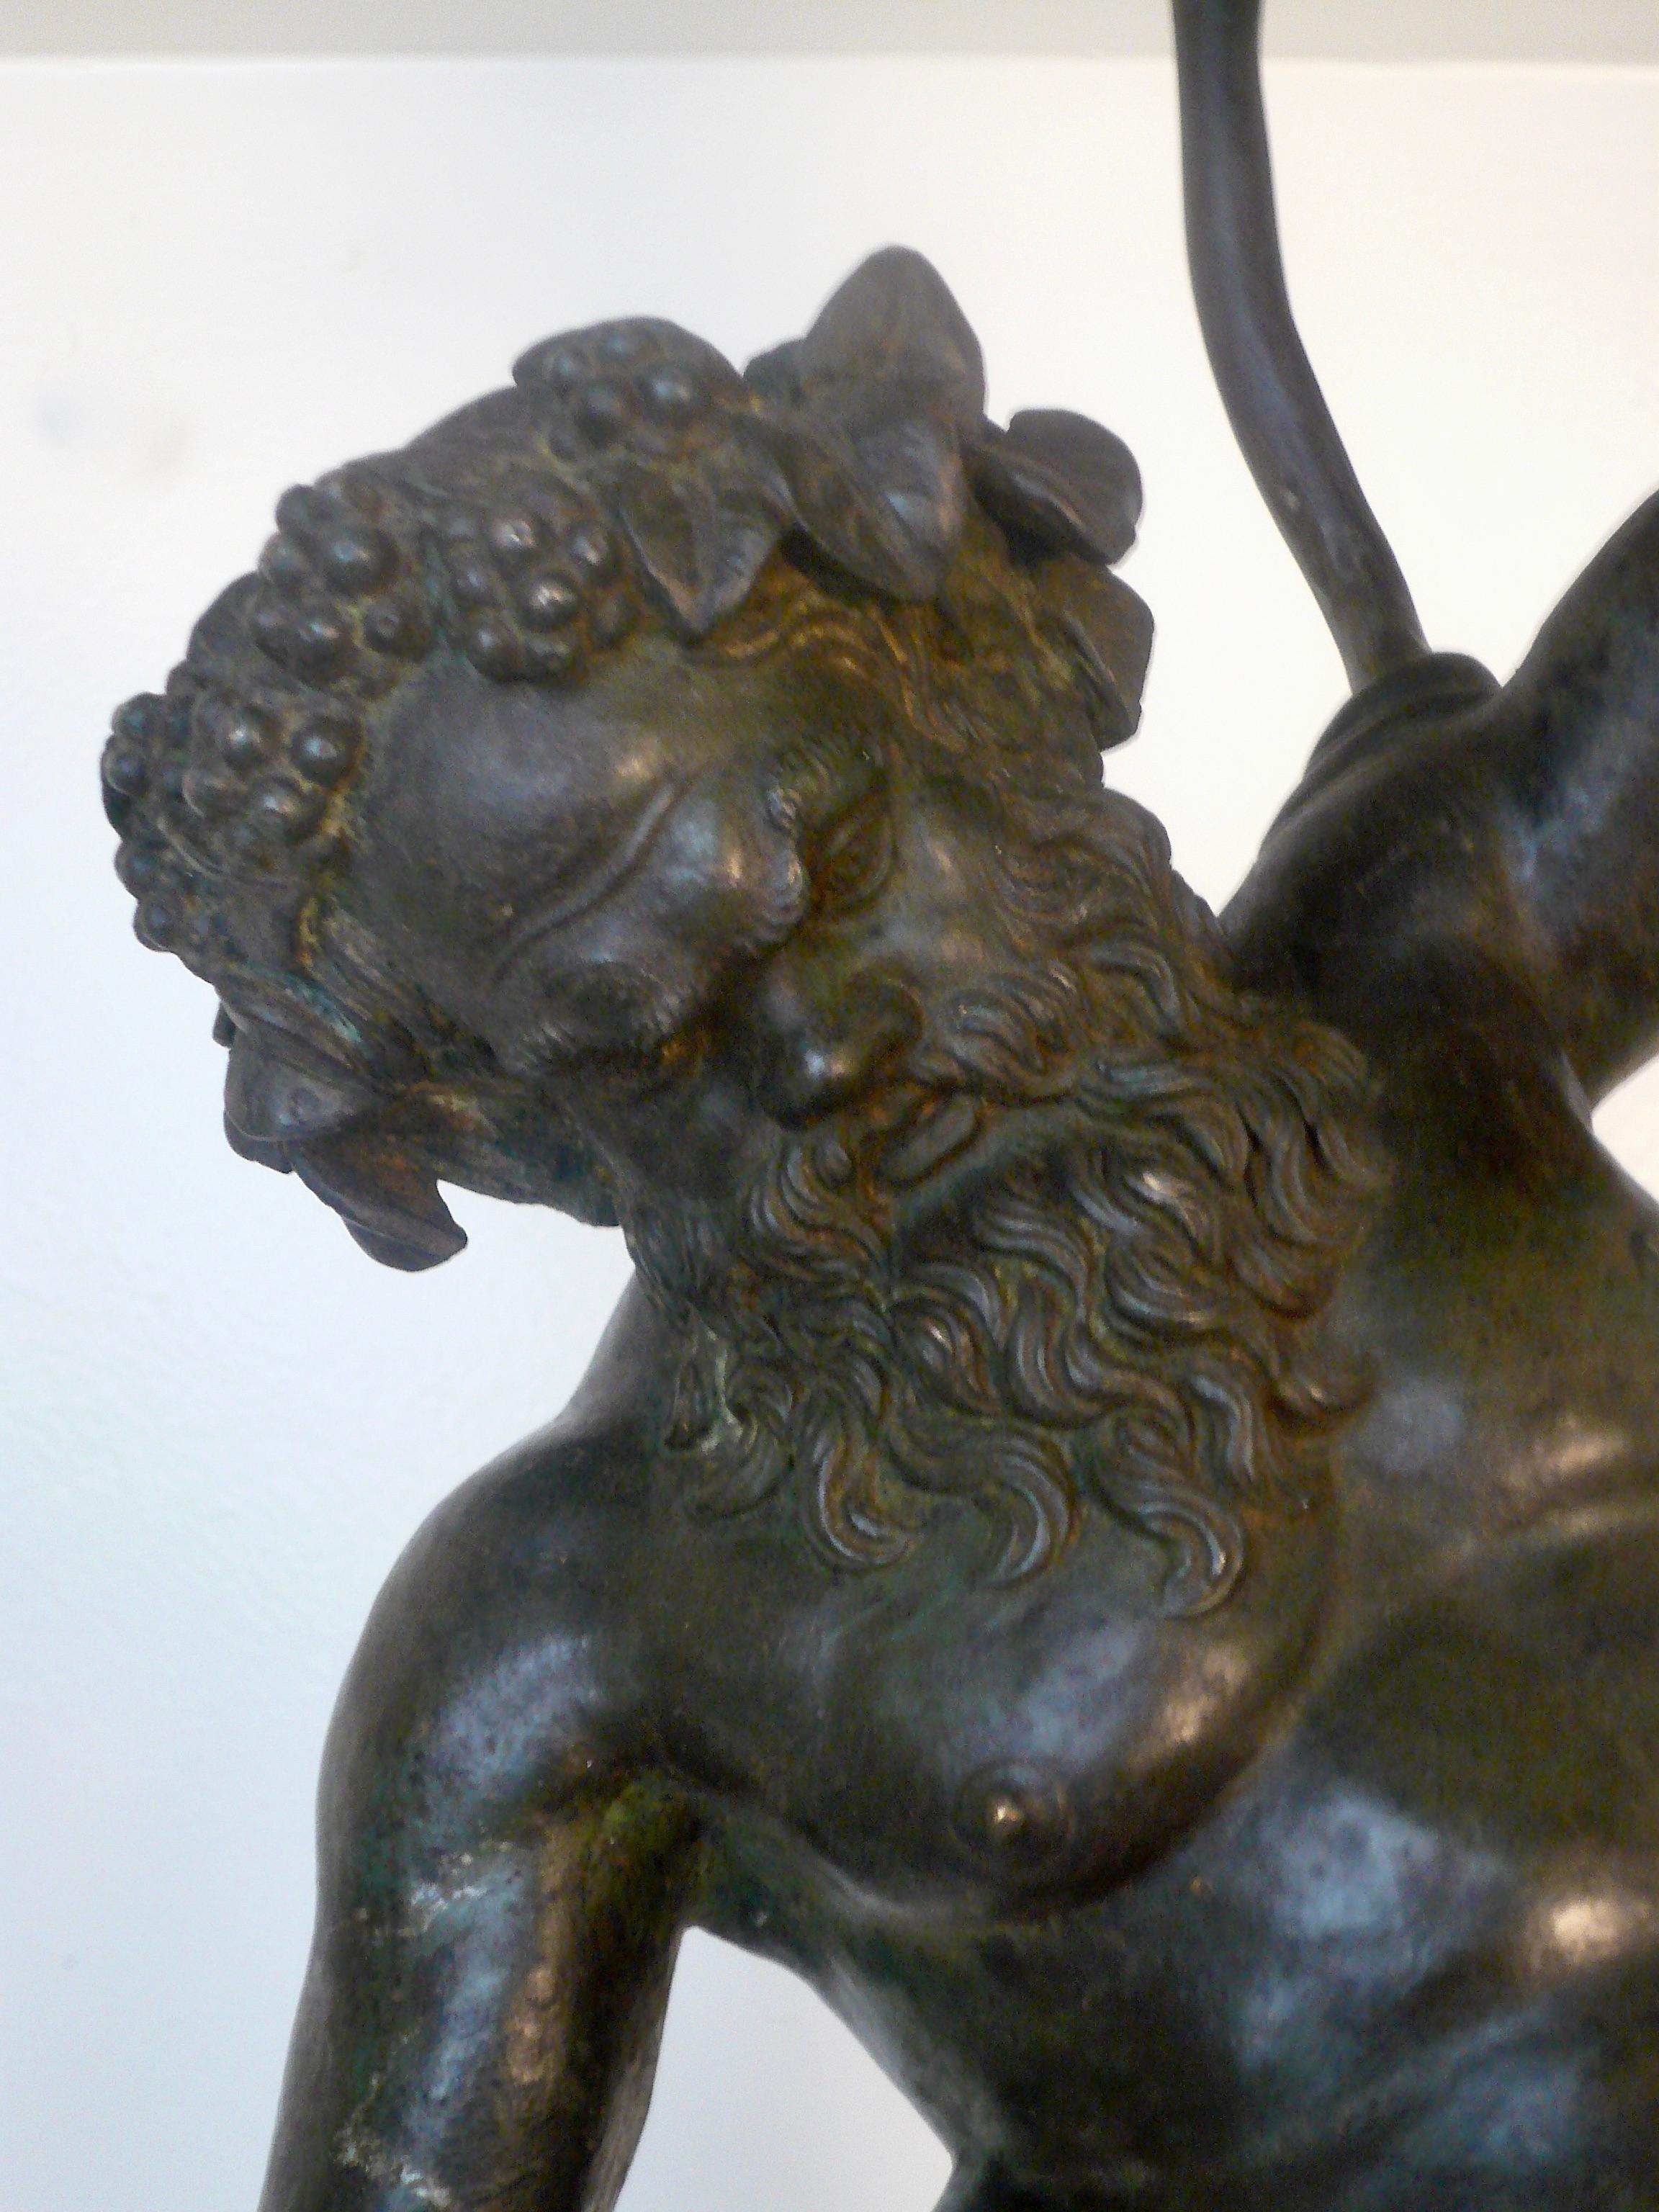 This 19th Century bronze figure of Silenus, God of wine, and tutor of Dionysus, is depicted wrestling a serpent. The serpent represented wisdom and eternal life to the Ancients. It is modeled after the sculpture found at Pompeii excavated in 1864,